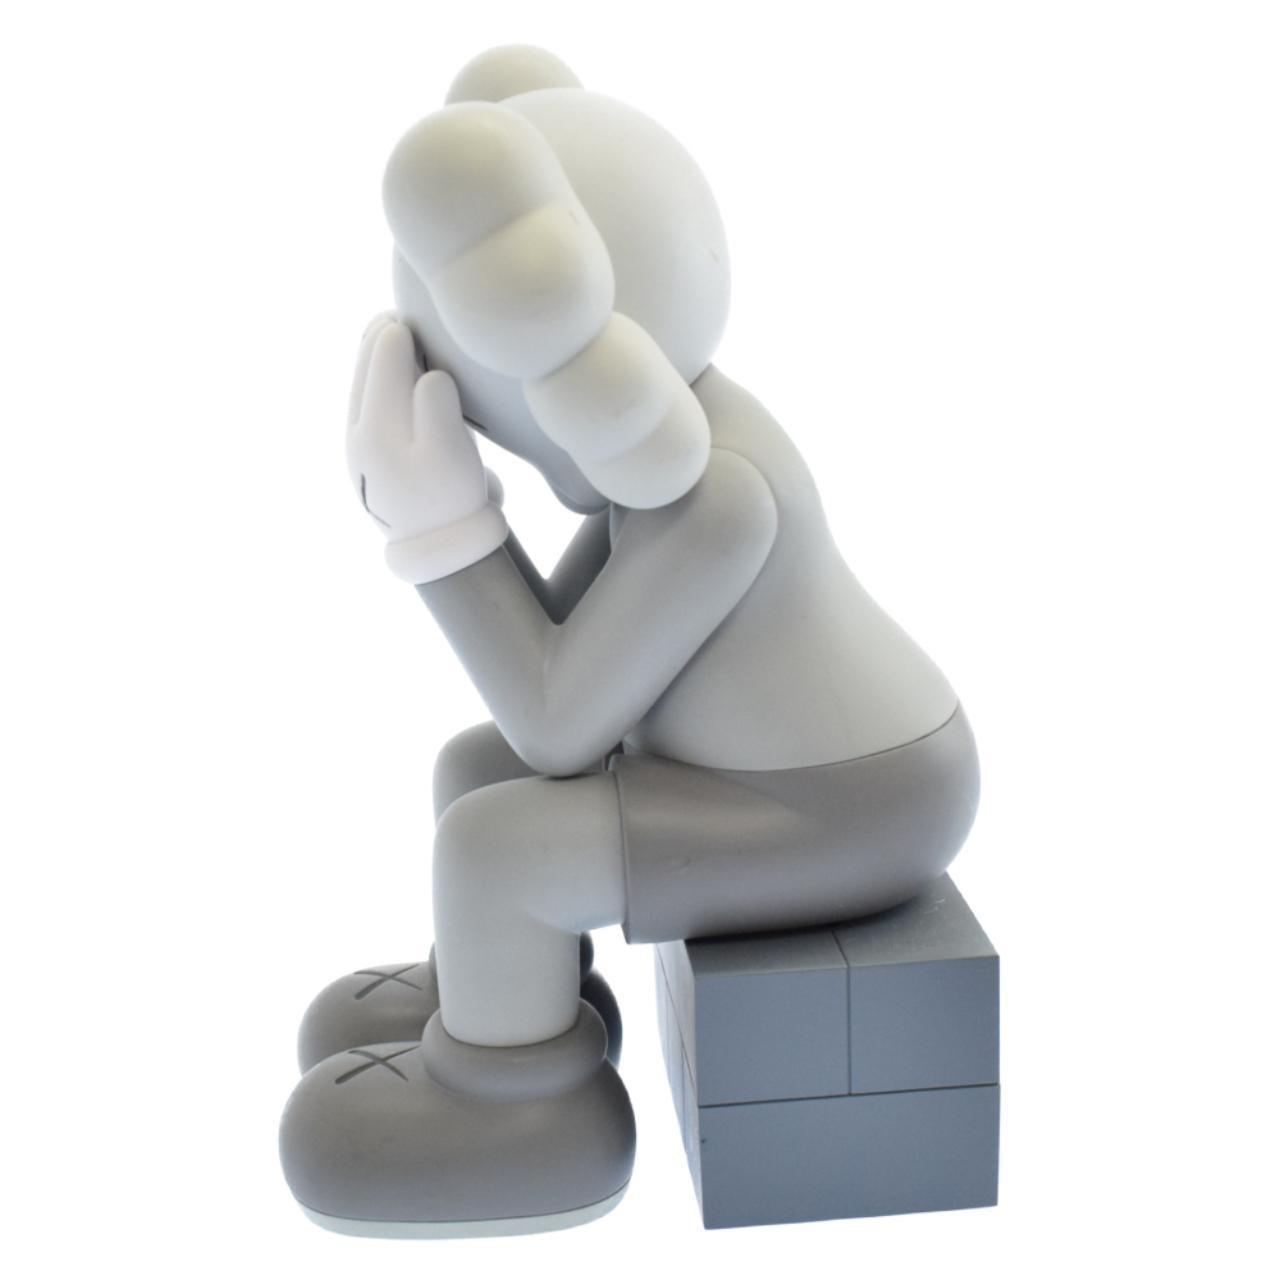 KAWS Passing Through Open Edition Vinyl Figure Grey - Known Source